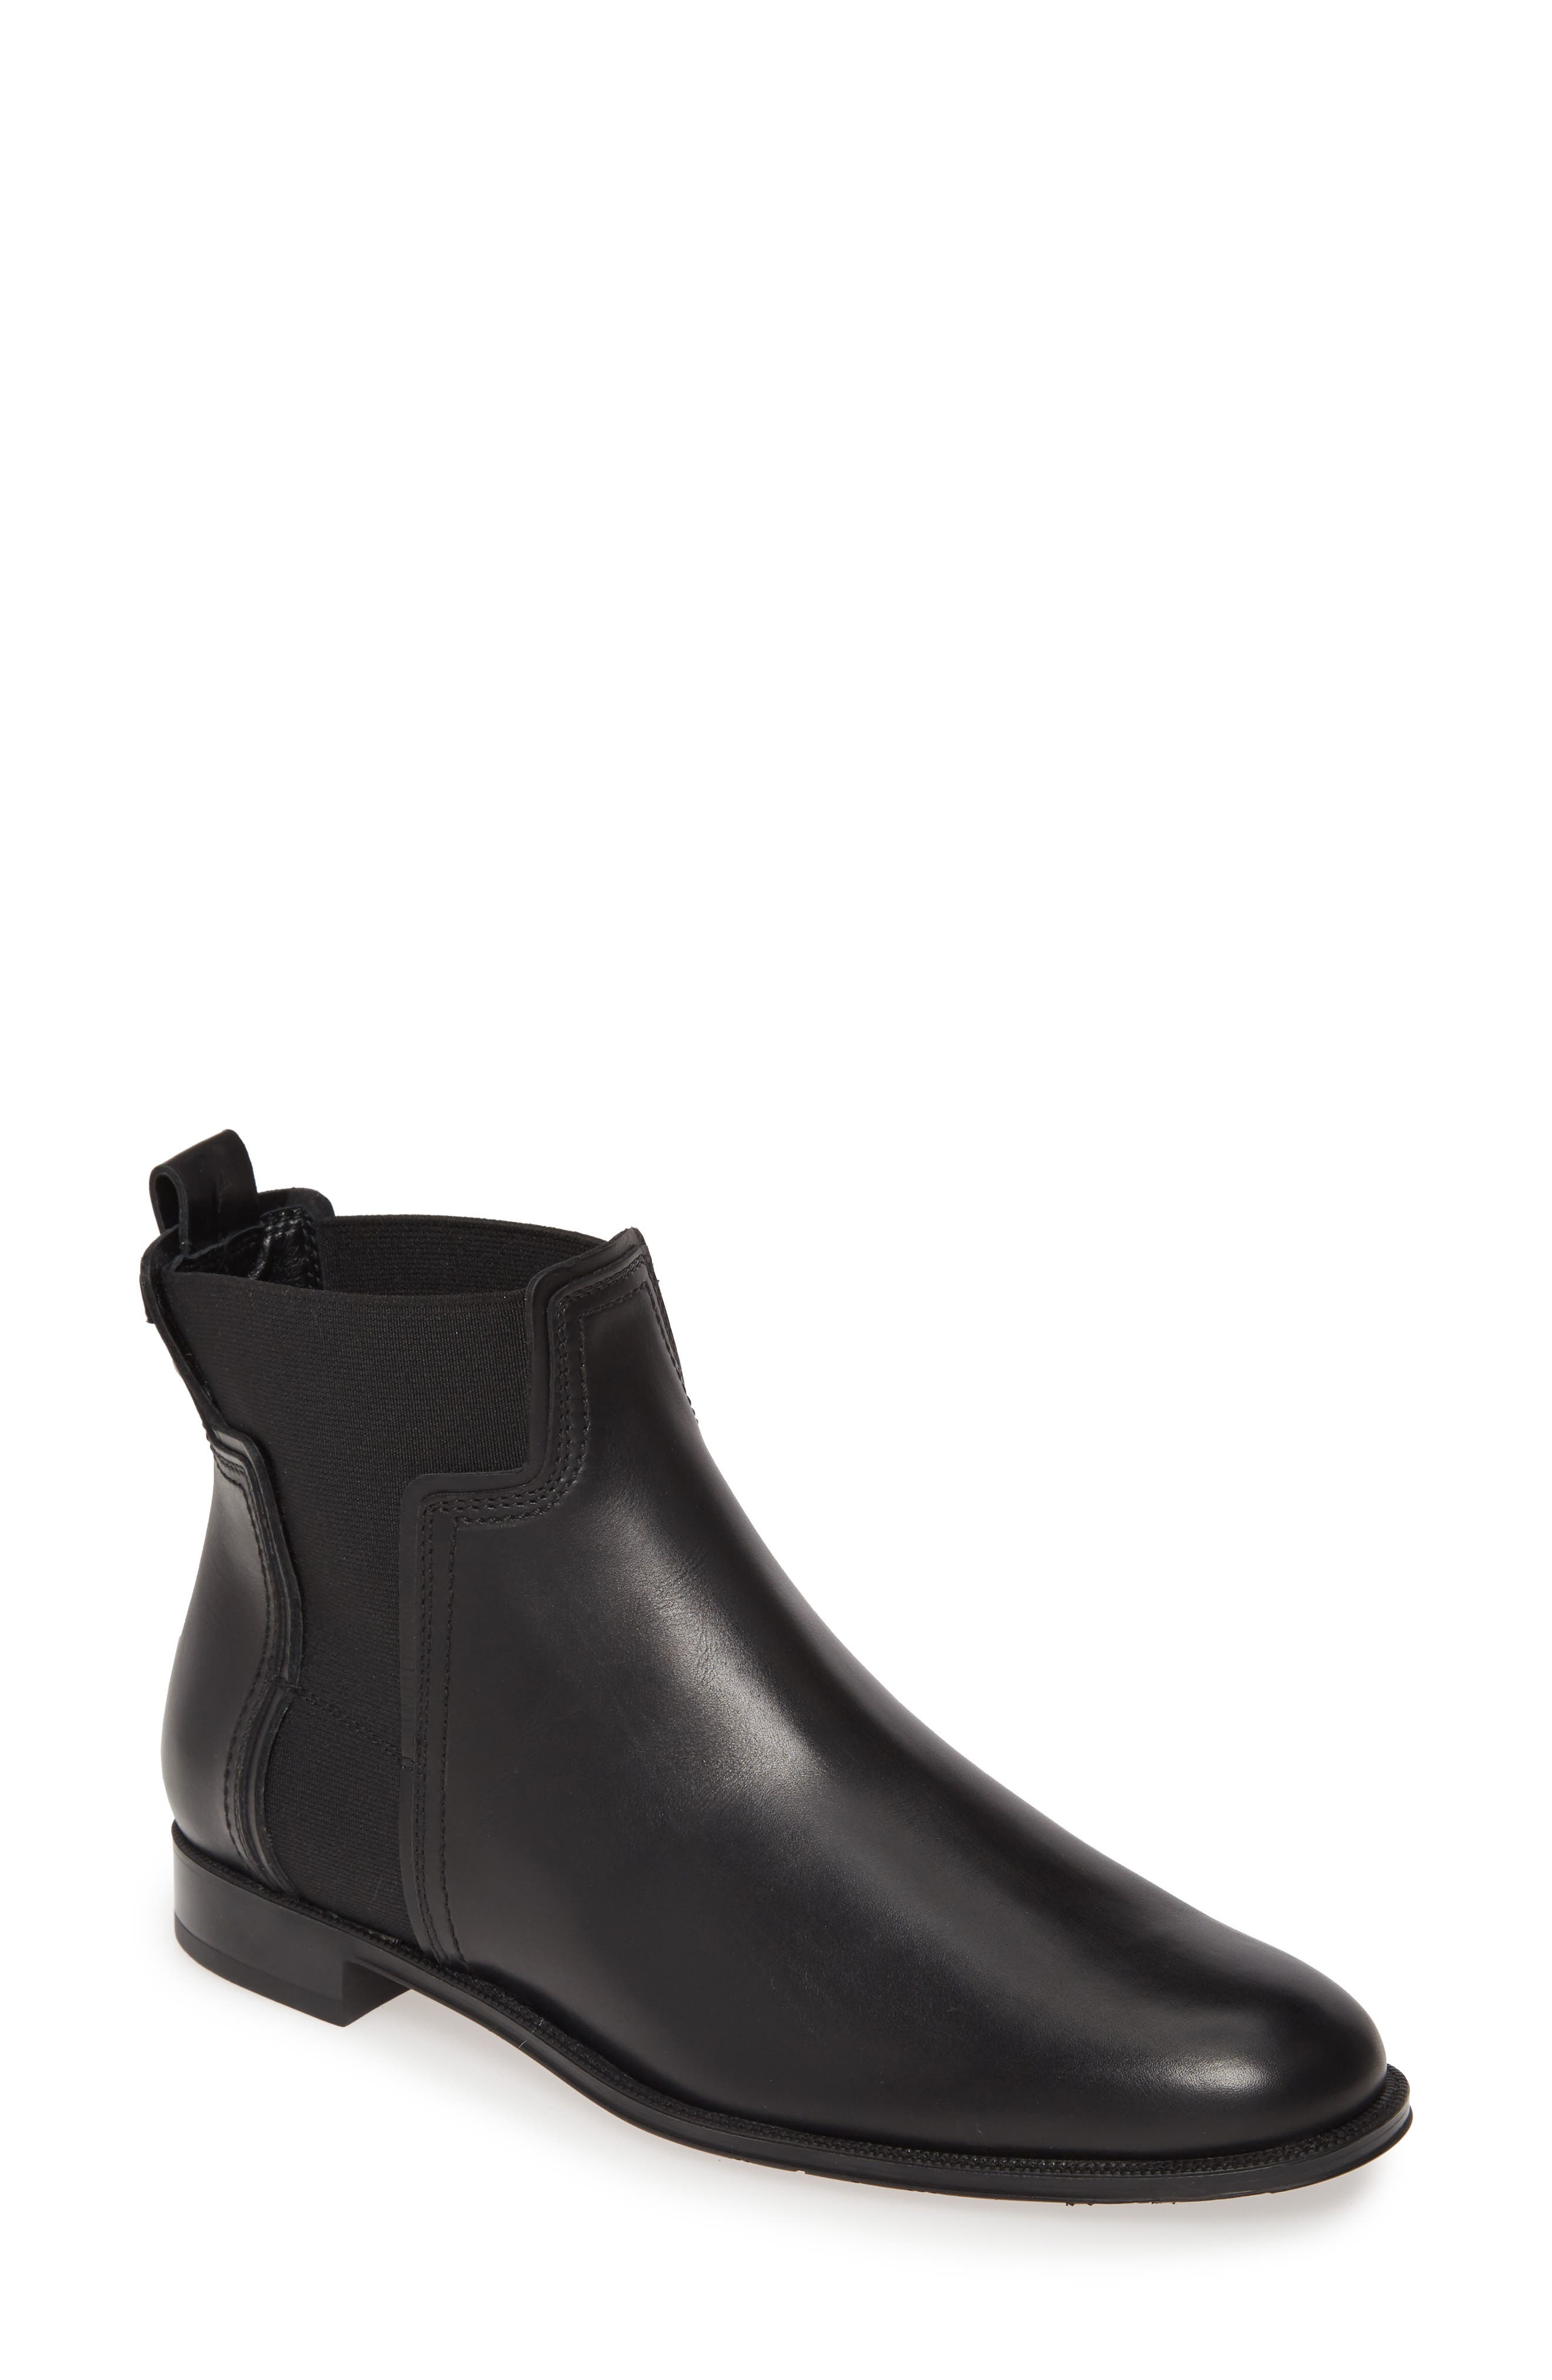 tods boots womens